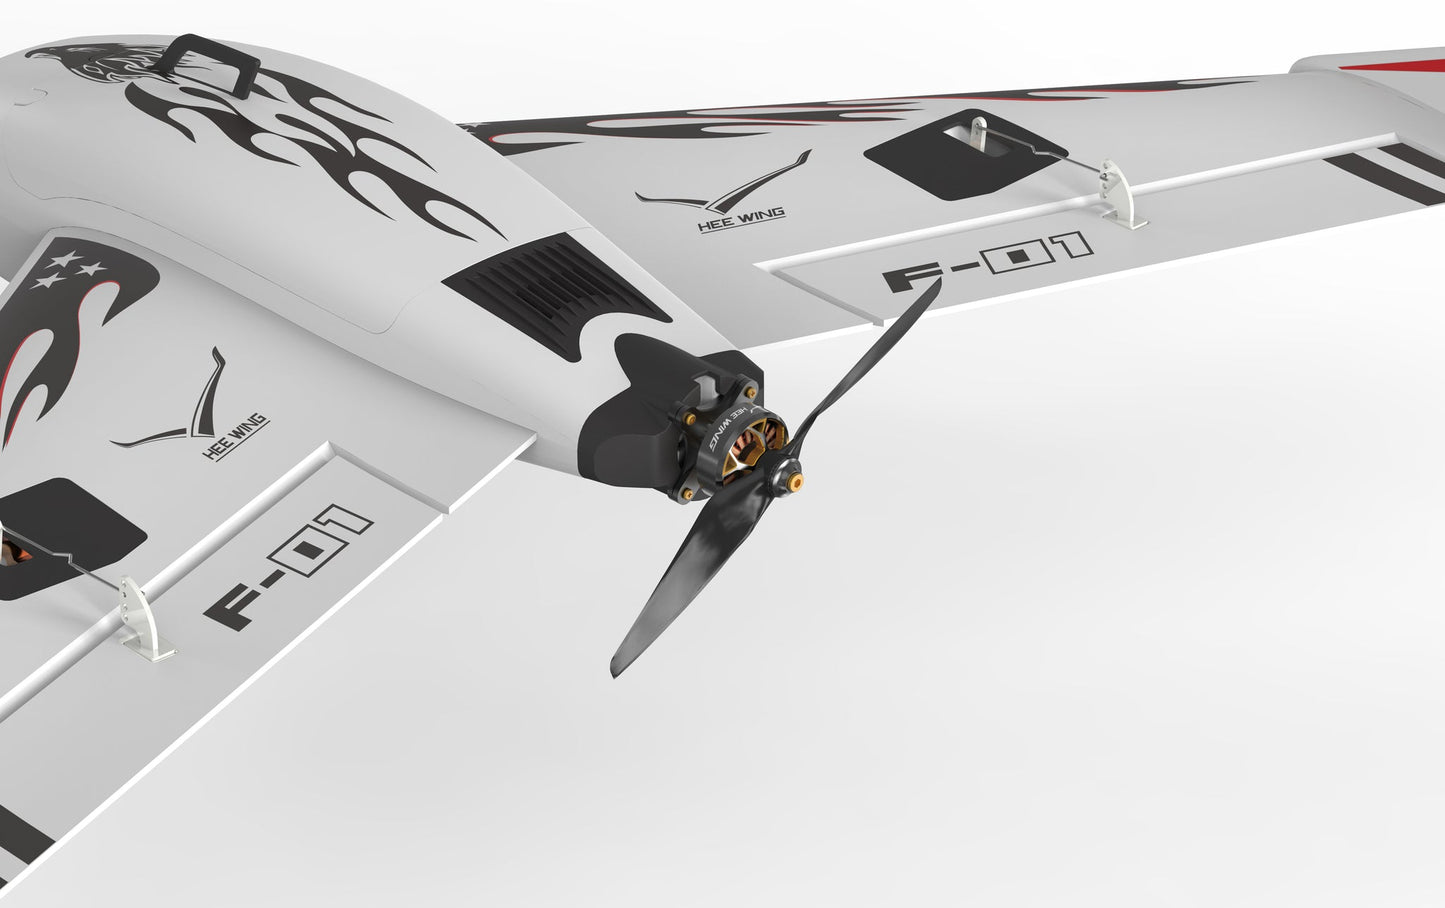 Hee Wing F01 wing 690mm EPP rc airplane